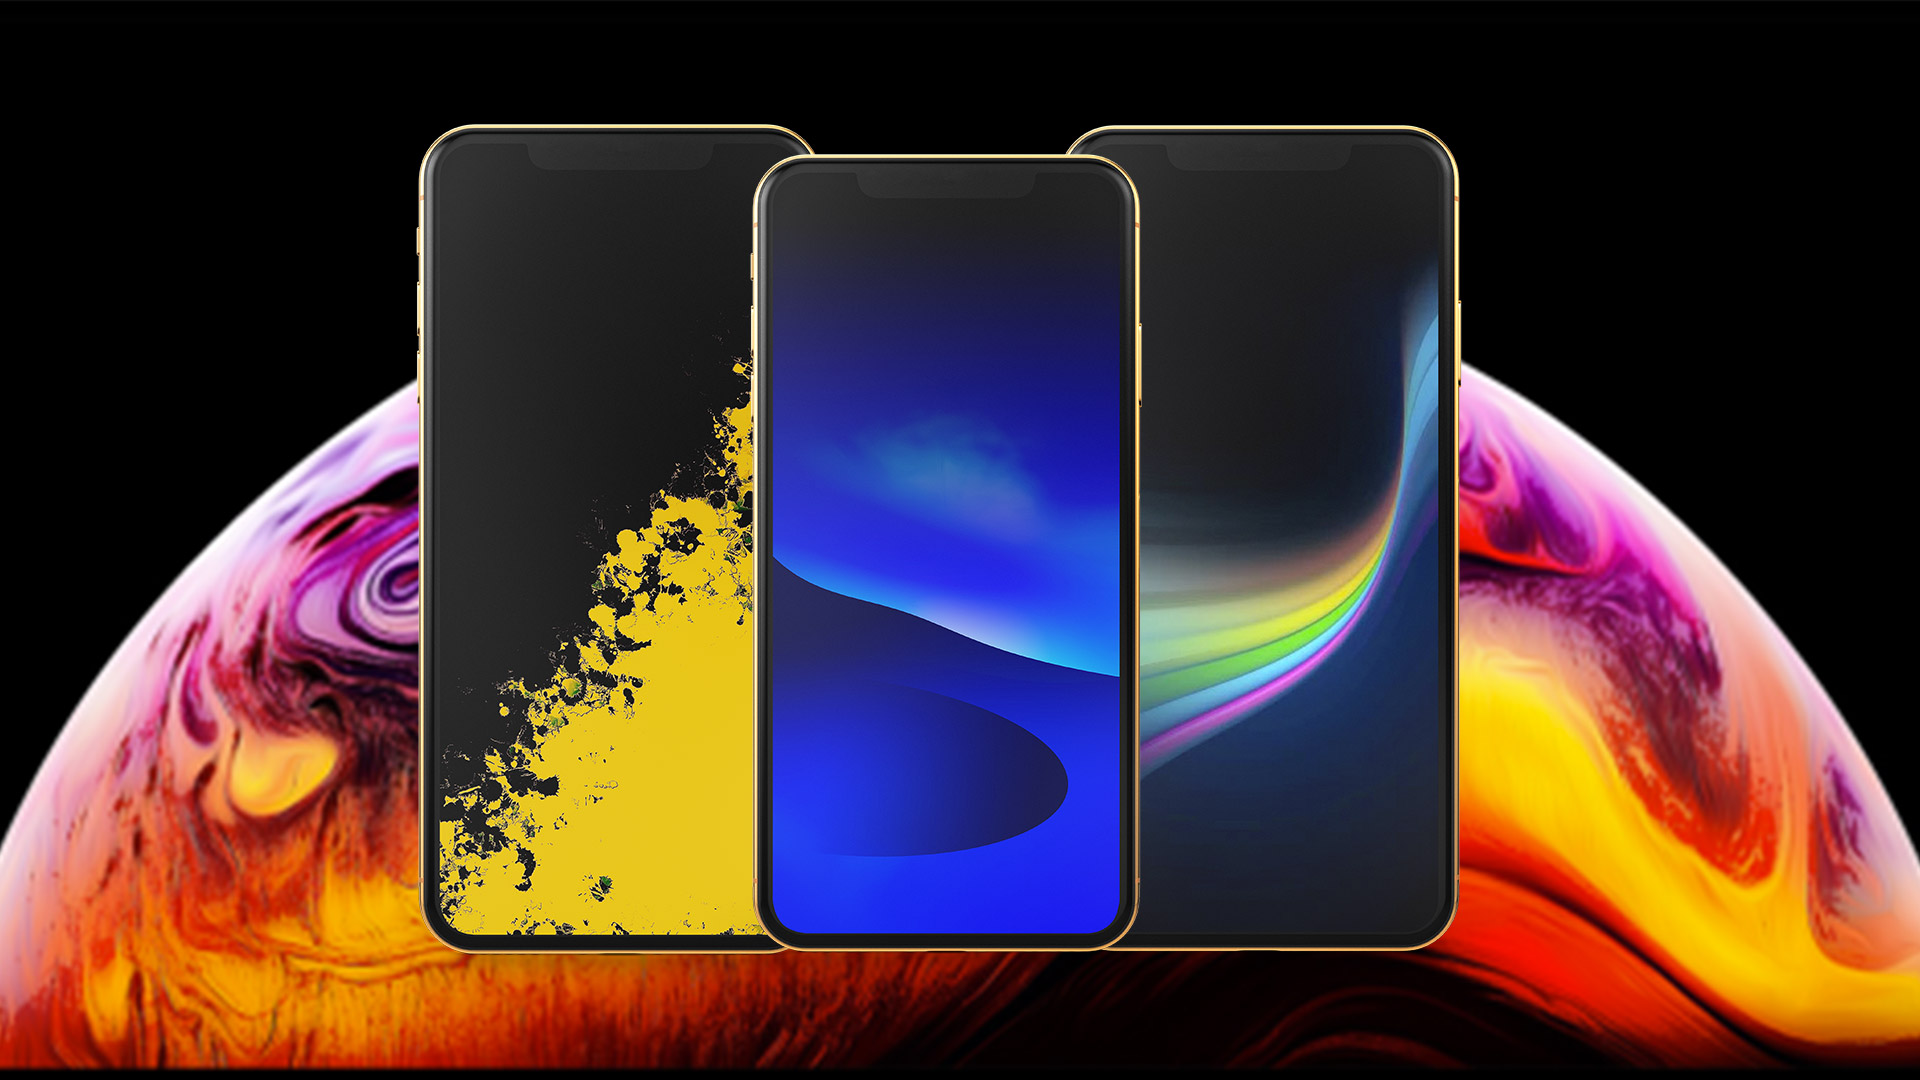 Best iPhone Xs Max Xs and iPhone XR Wallpapers